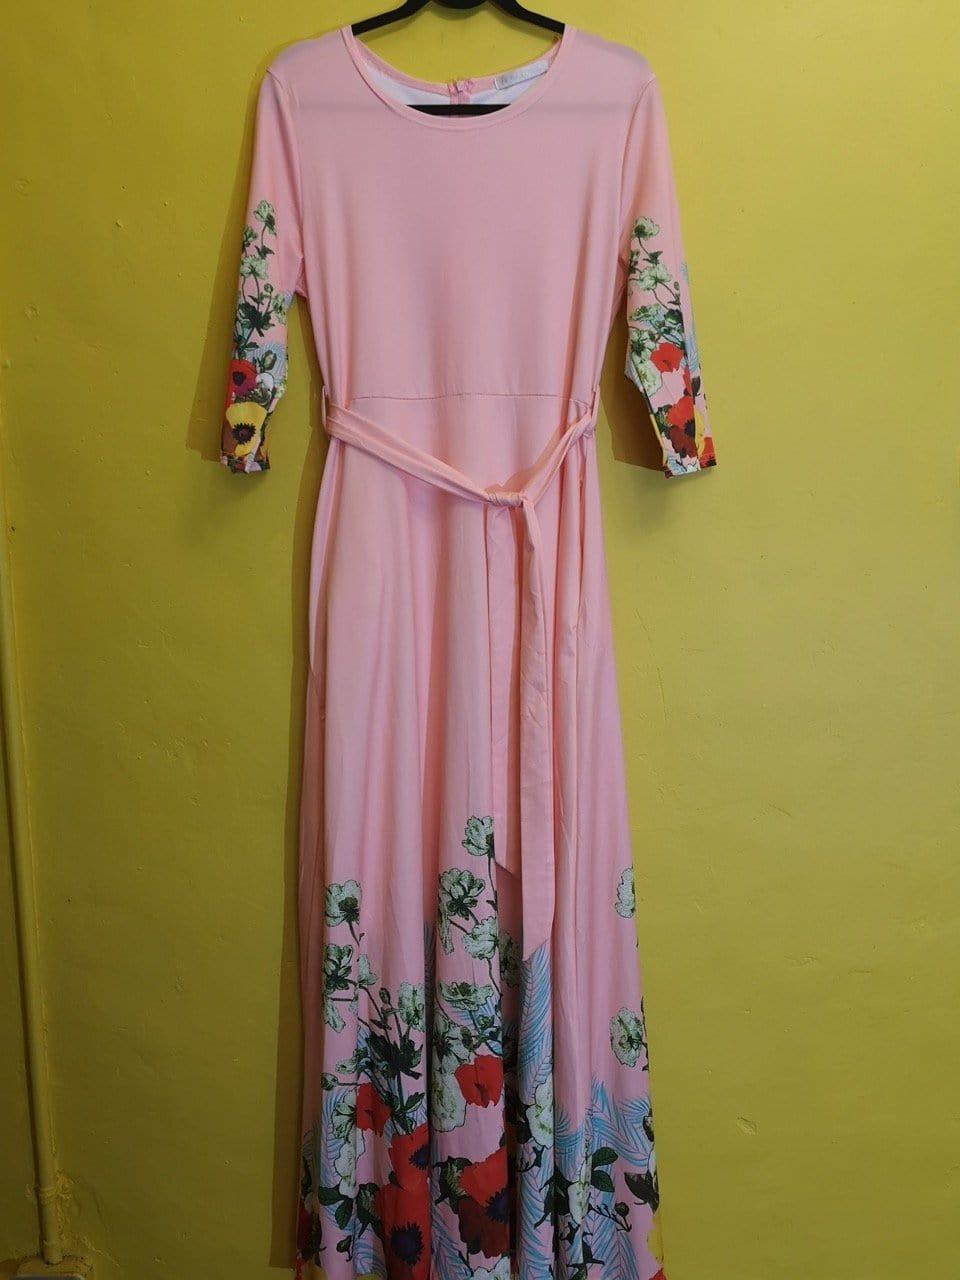 Flower dress with pockets